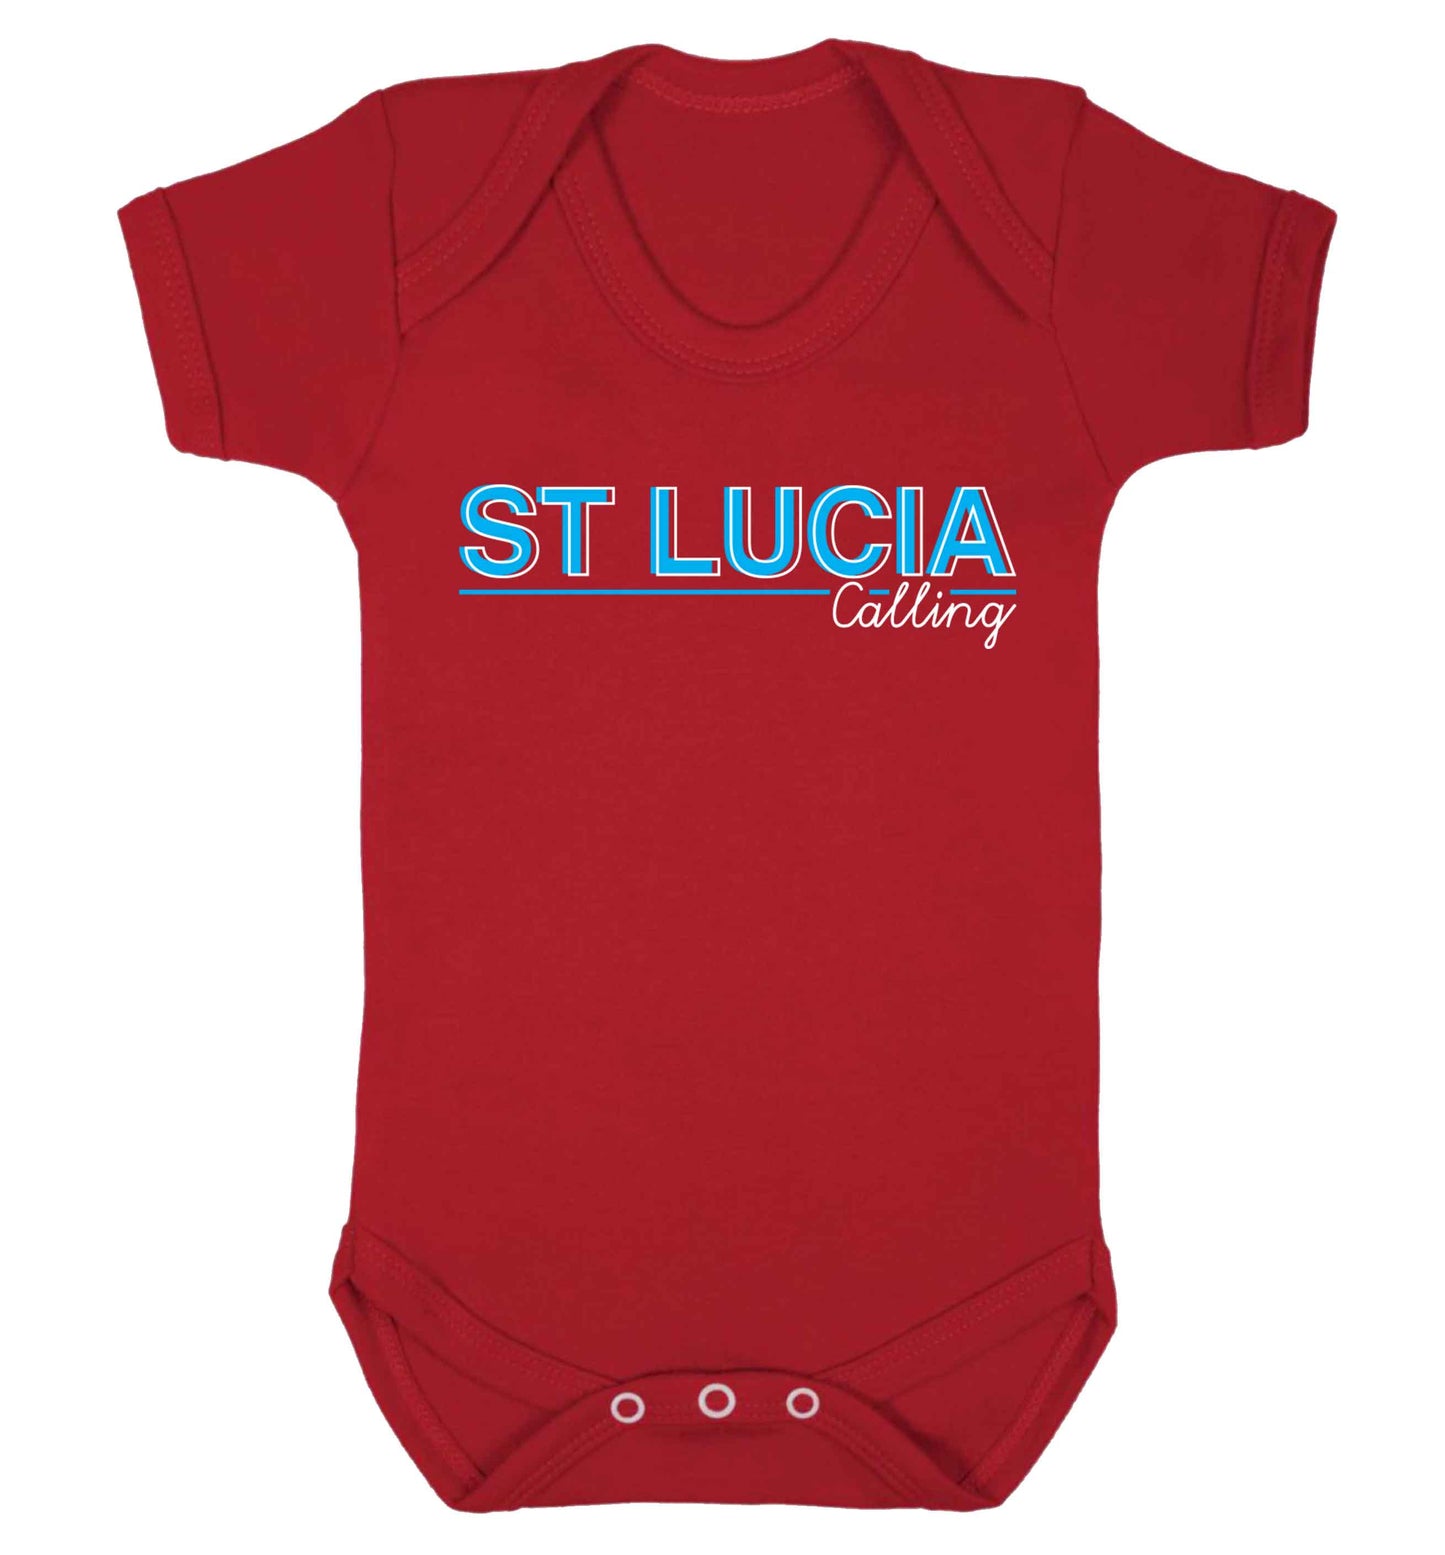 St Lucia calling Baby Vest red 18-24 months